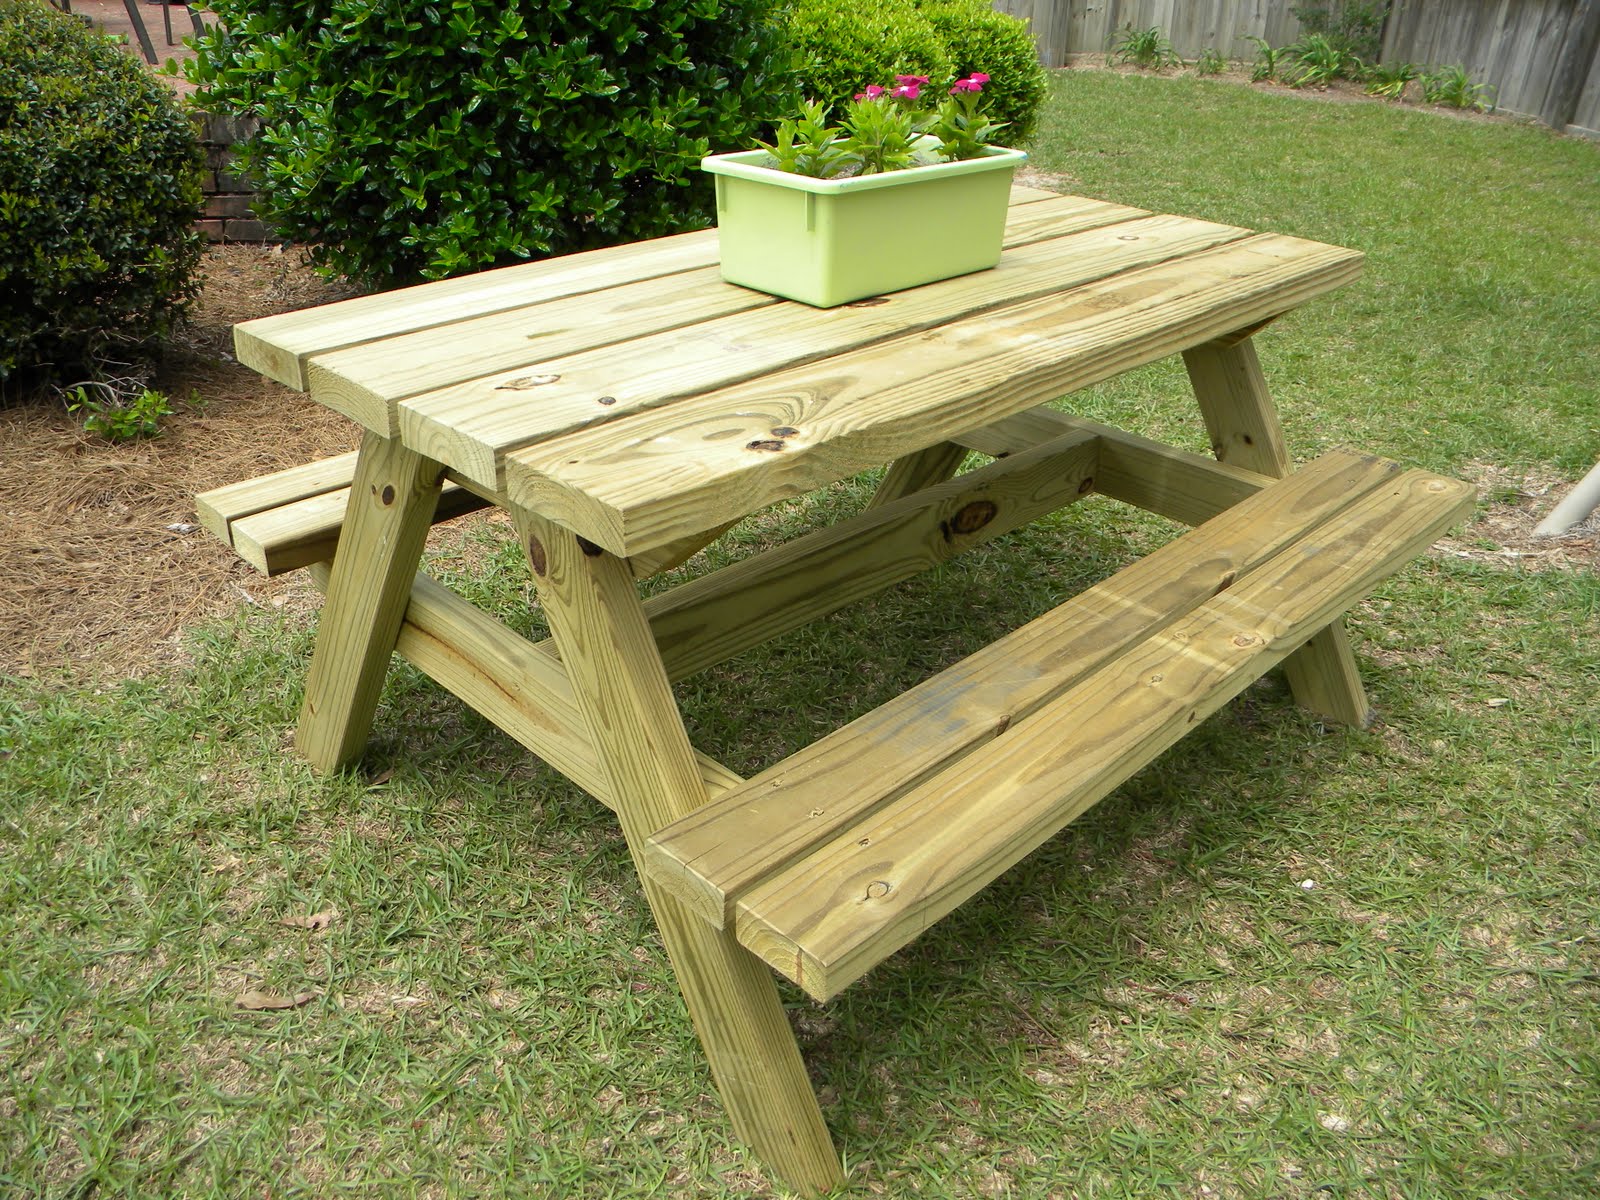 Guide to Get Picnic table with built in cooler plans ~ The bench